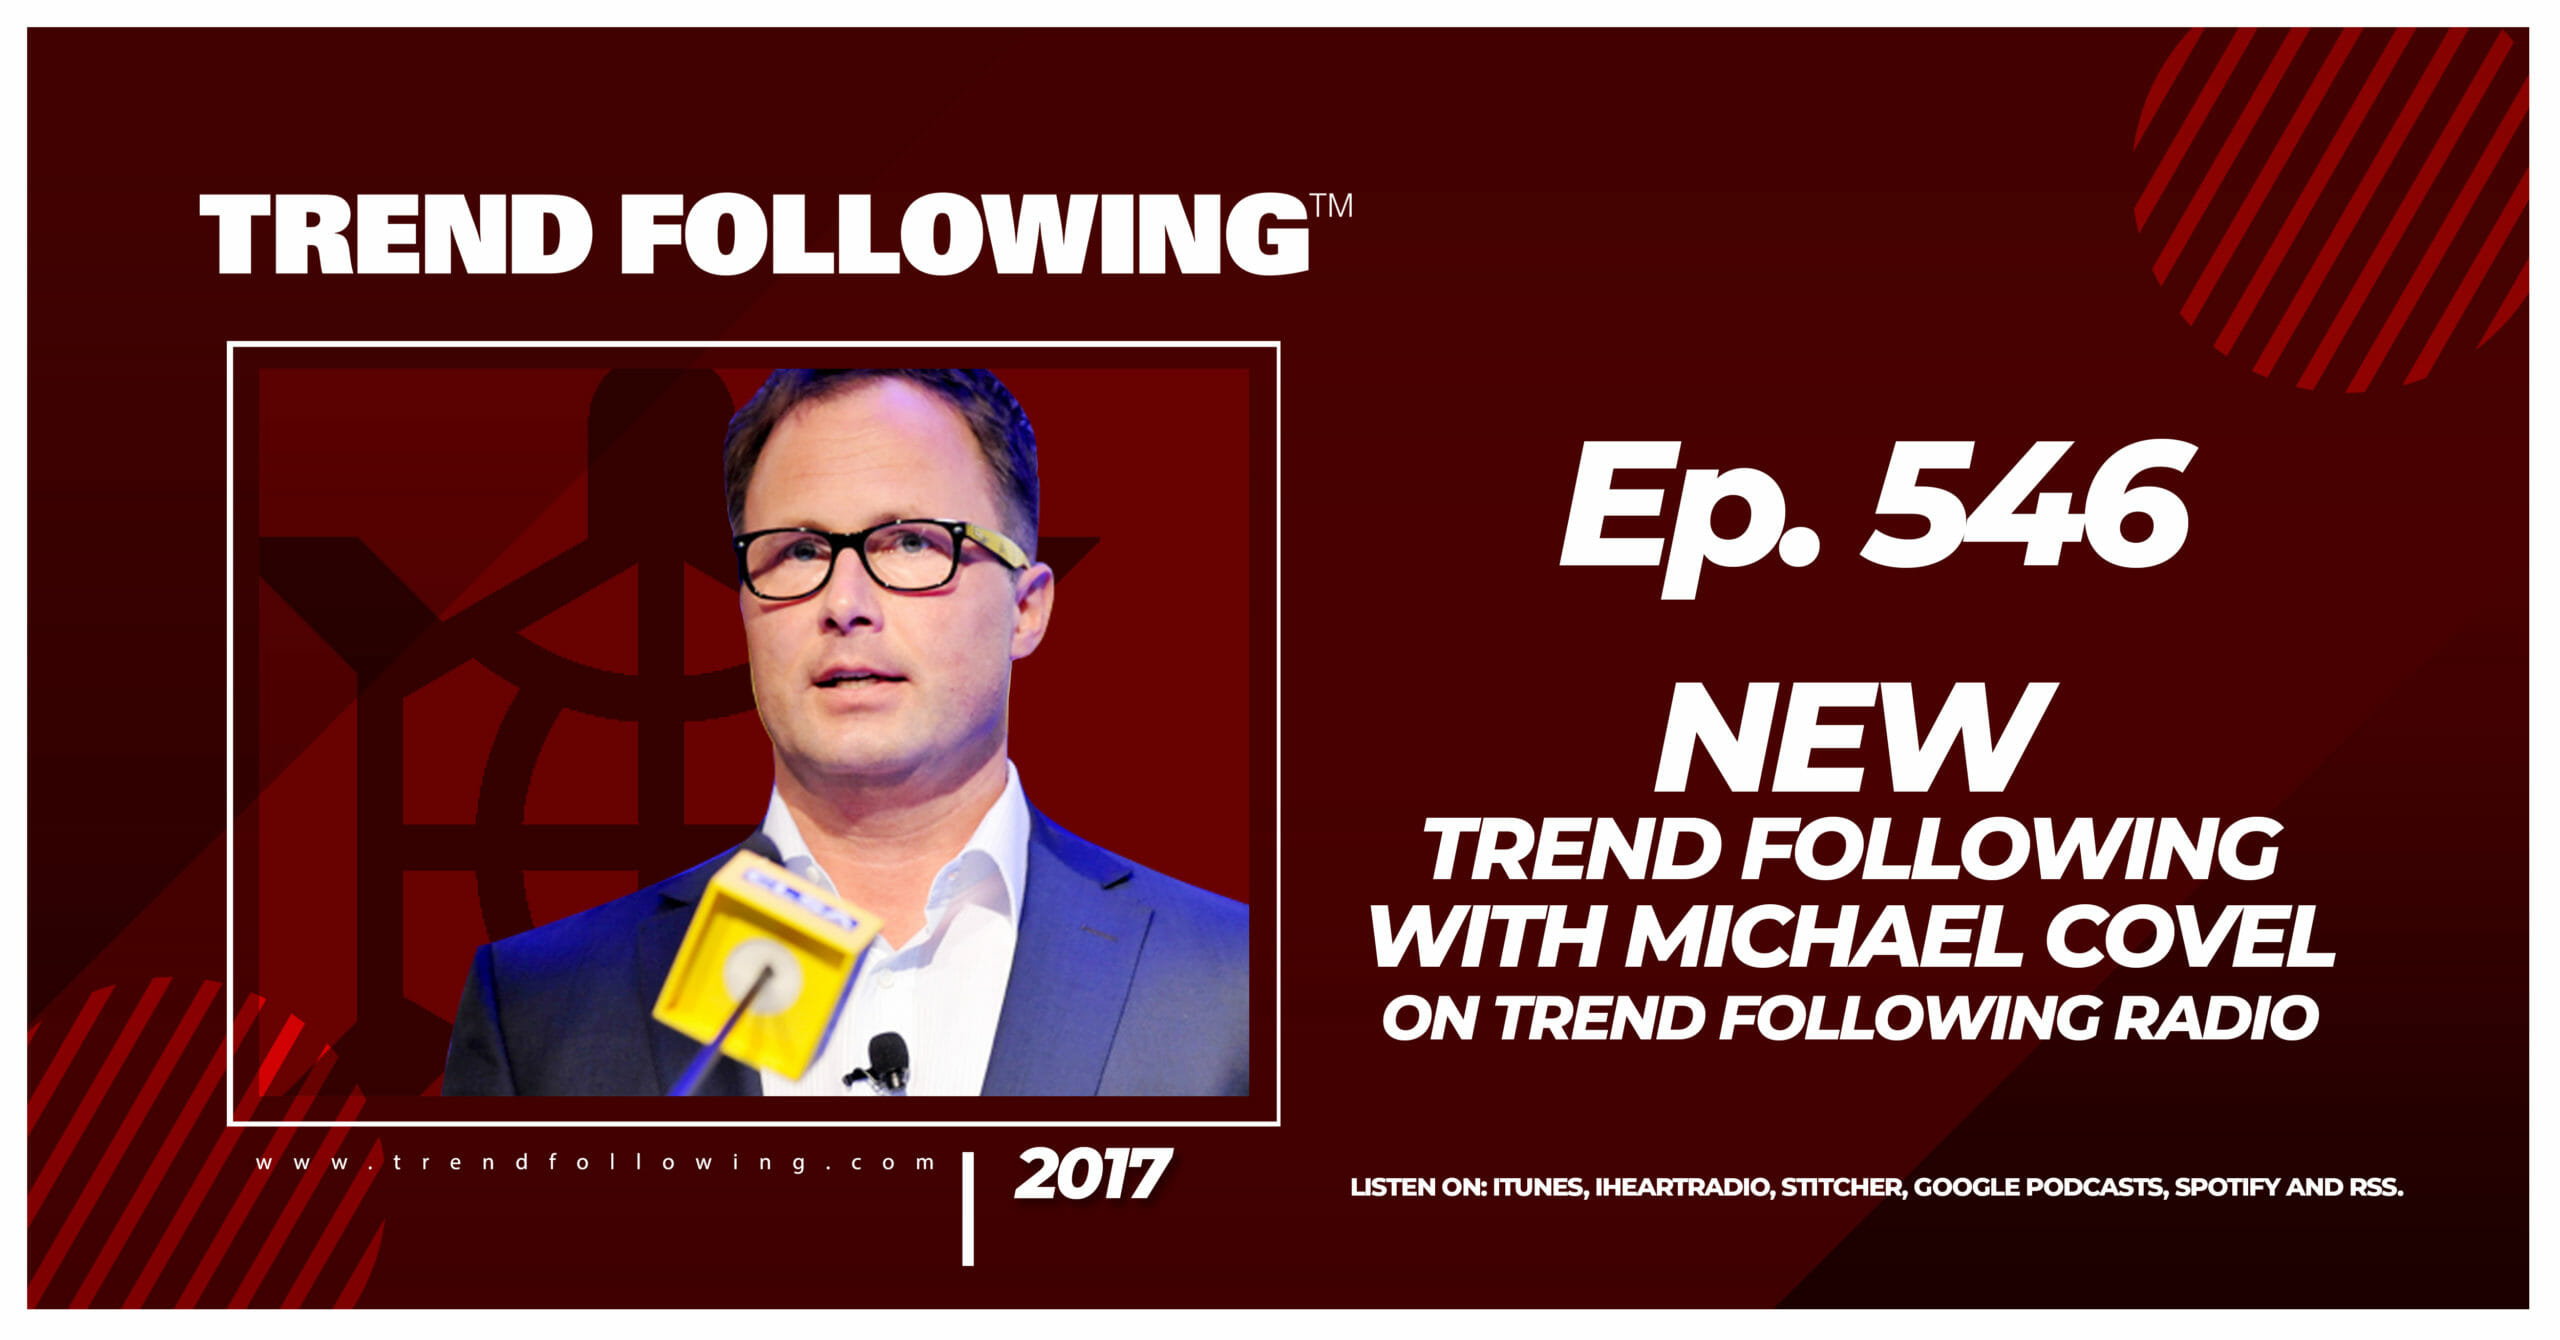 New Trend Following with Michael Covel on Trend Following Radio